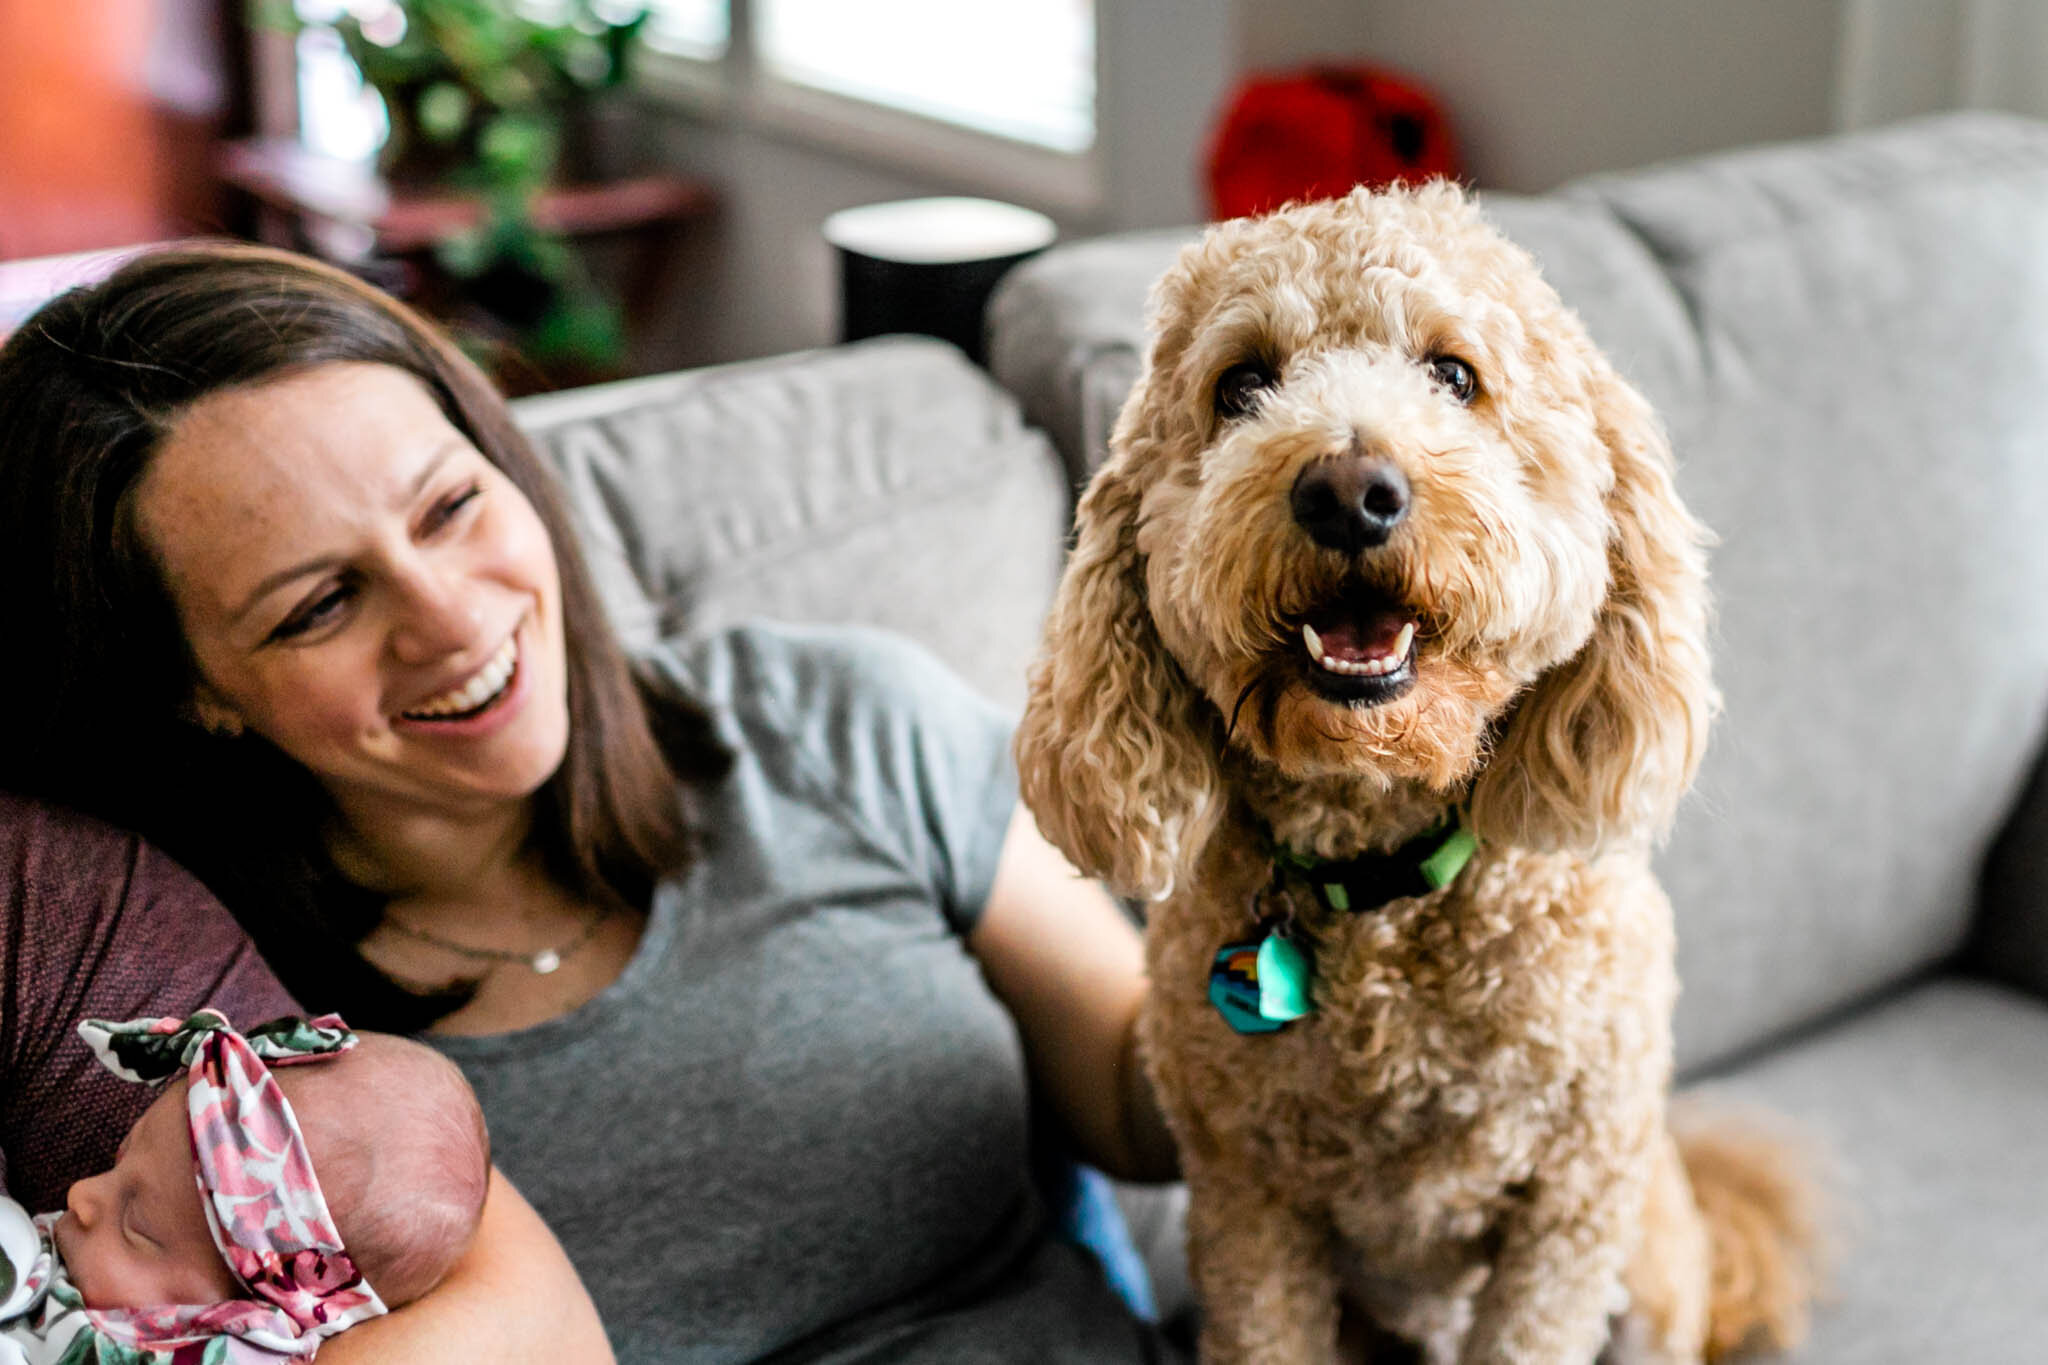 Hillsborough Newborn Photographer | By G. Lin Photography | Mini goldendoodle smiling at camera